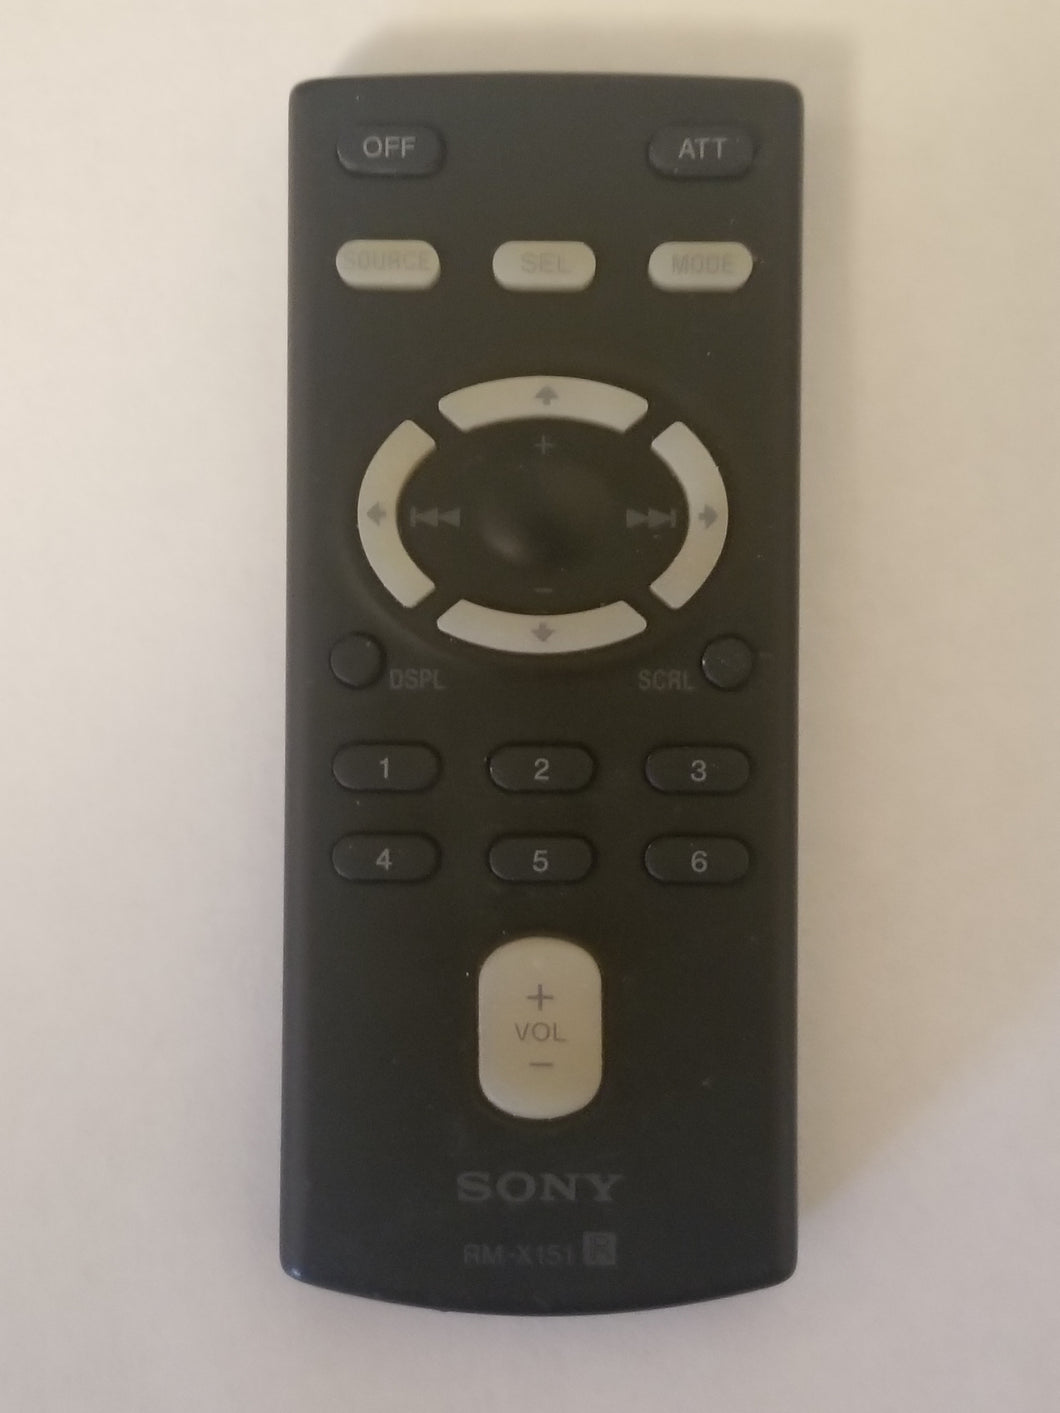 SONY RM-X151 Remote Control for car stereo or boat audio system